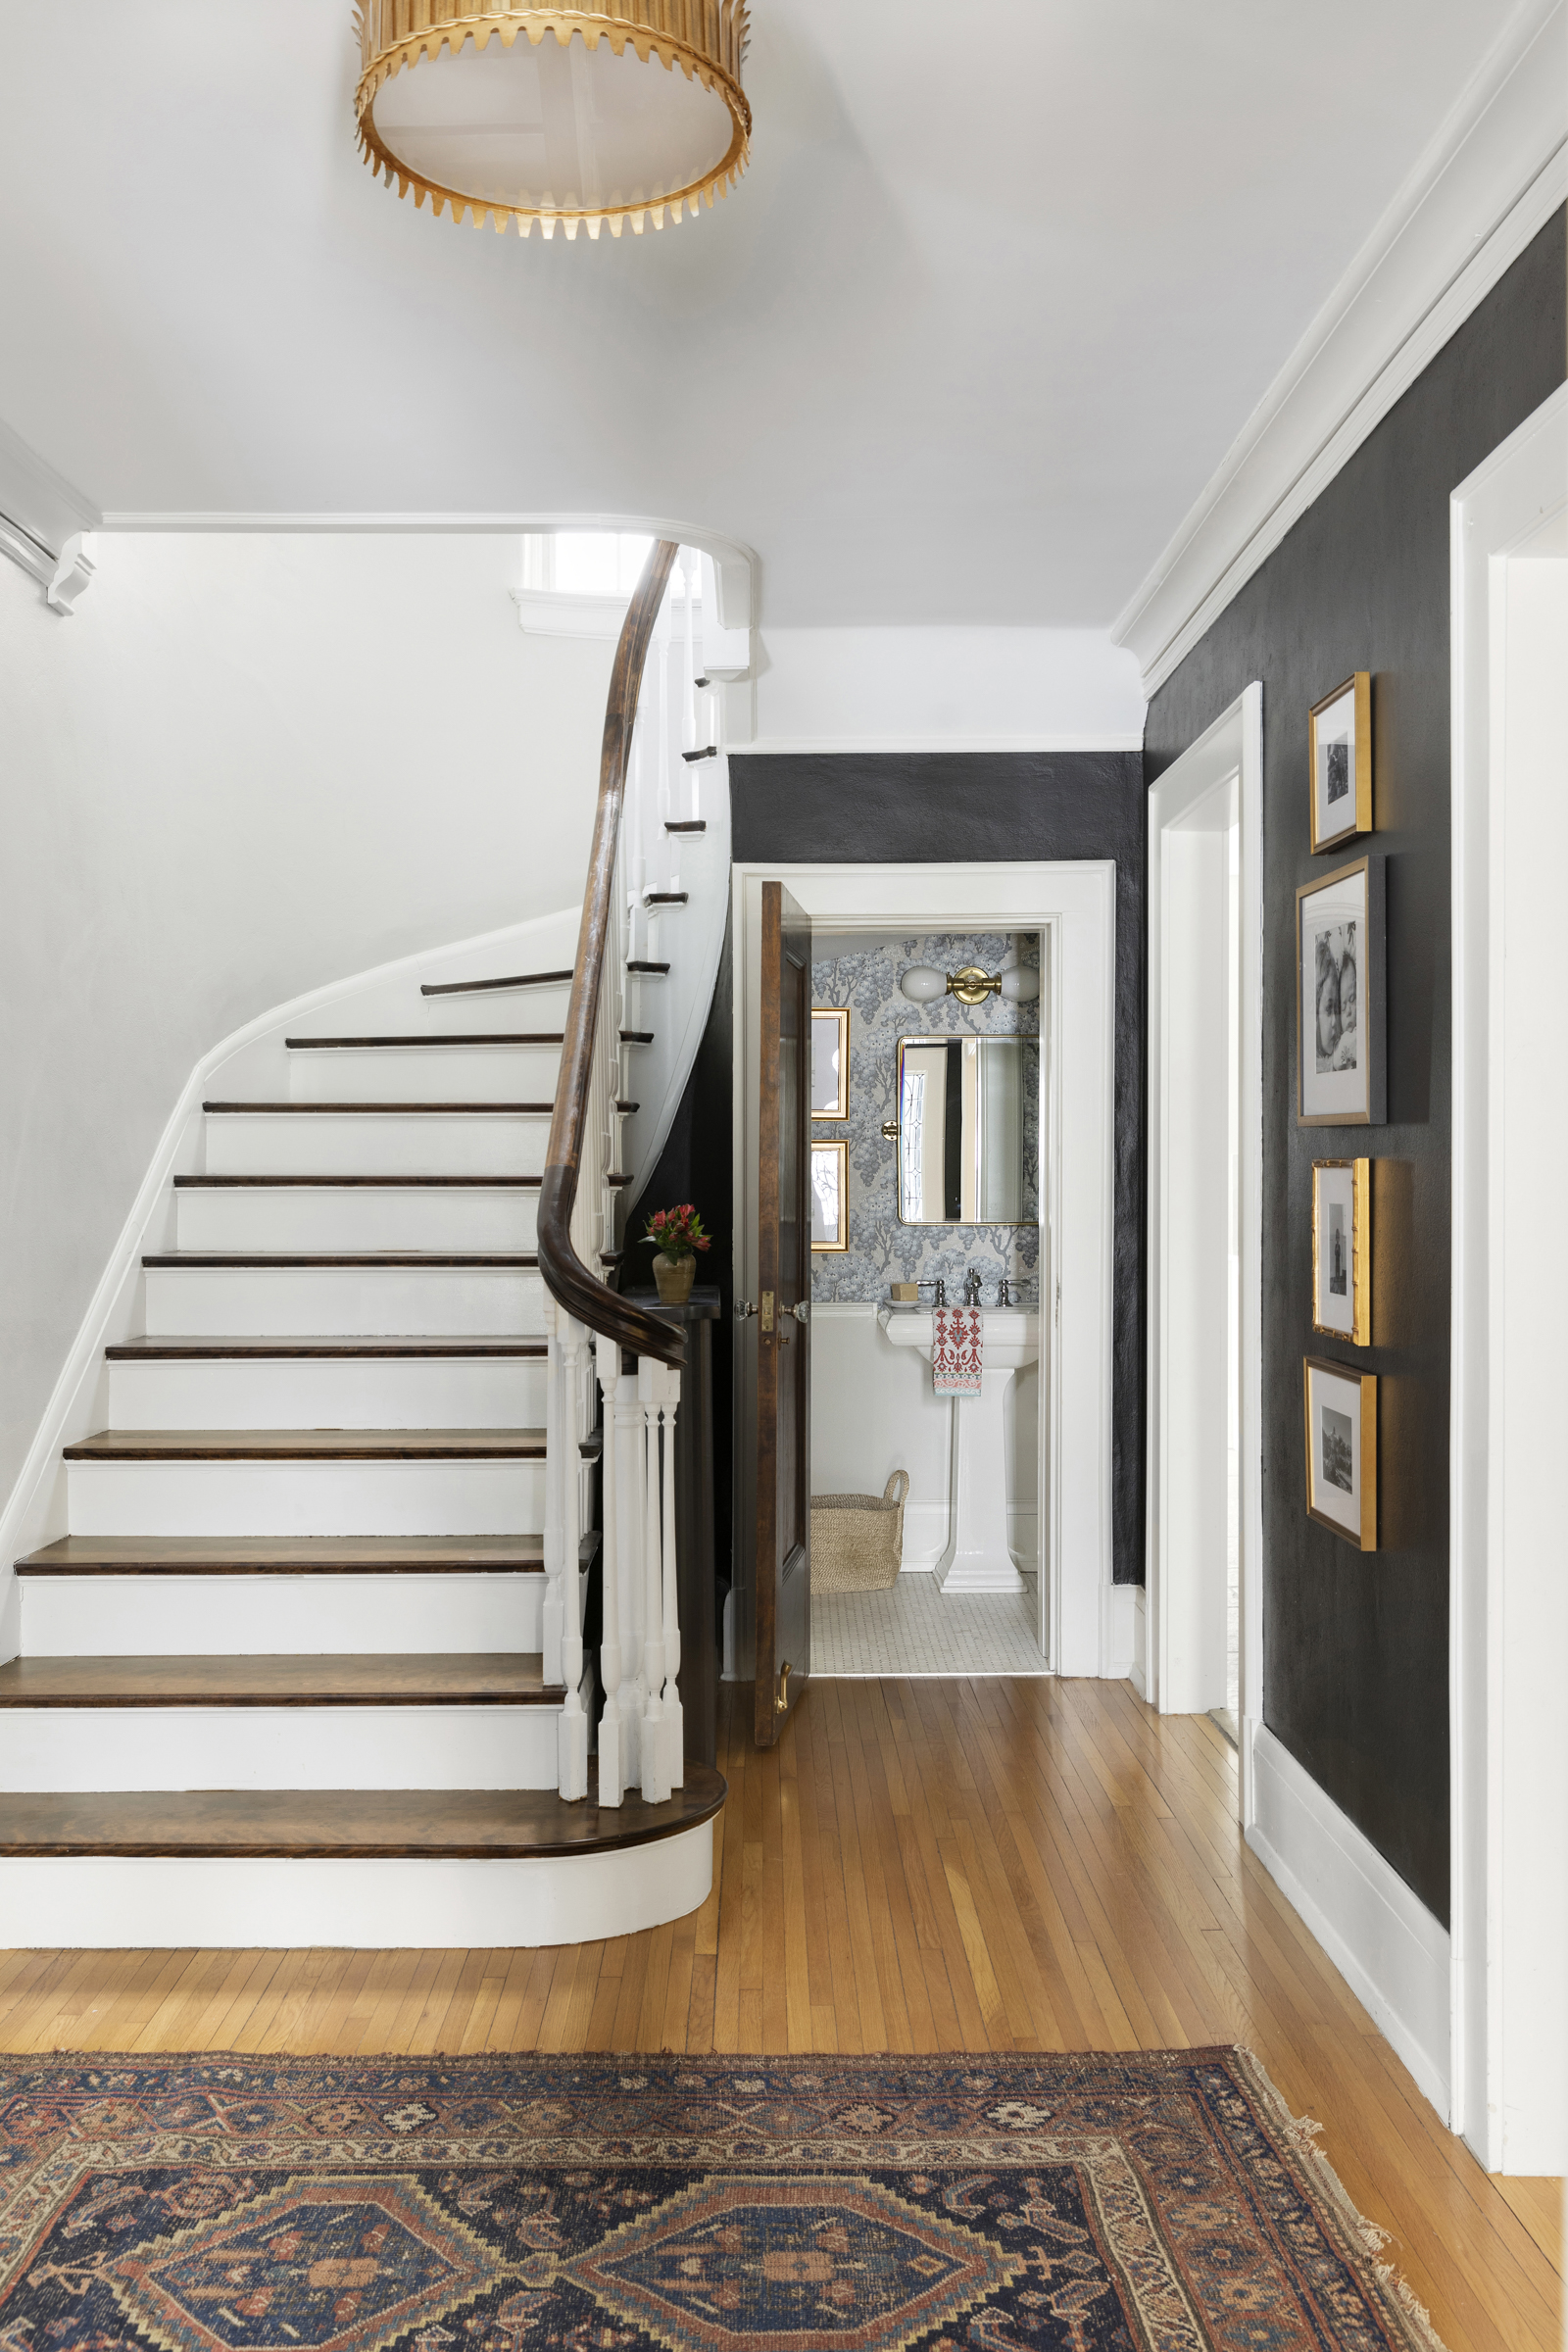 Twin Cities foyer renovation with curved staircase and dark walls.